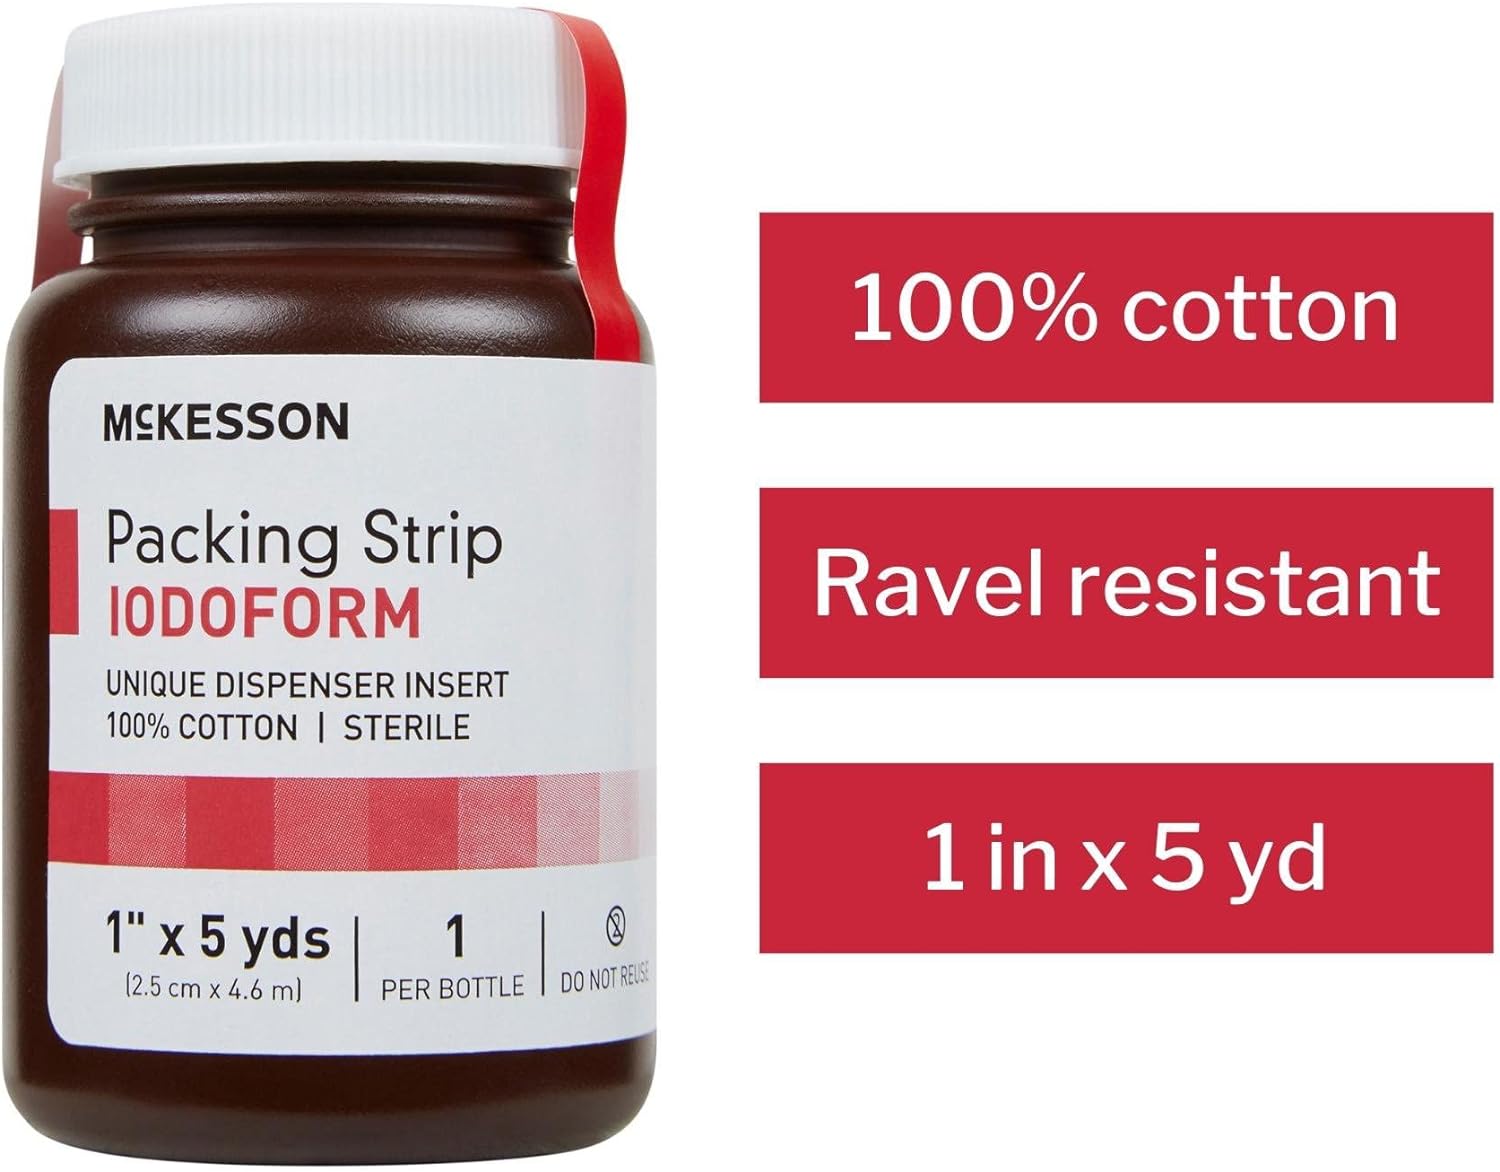 McKesson Packing Strip, Sterile, Iodoform, 100% Cotton, 1 in x 5 yds, 12 Count